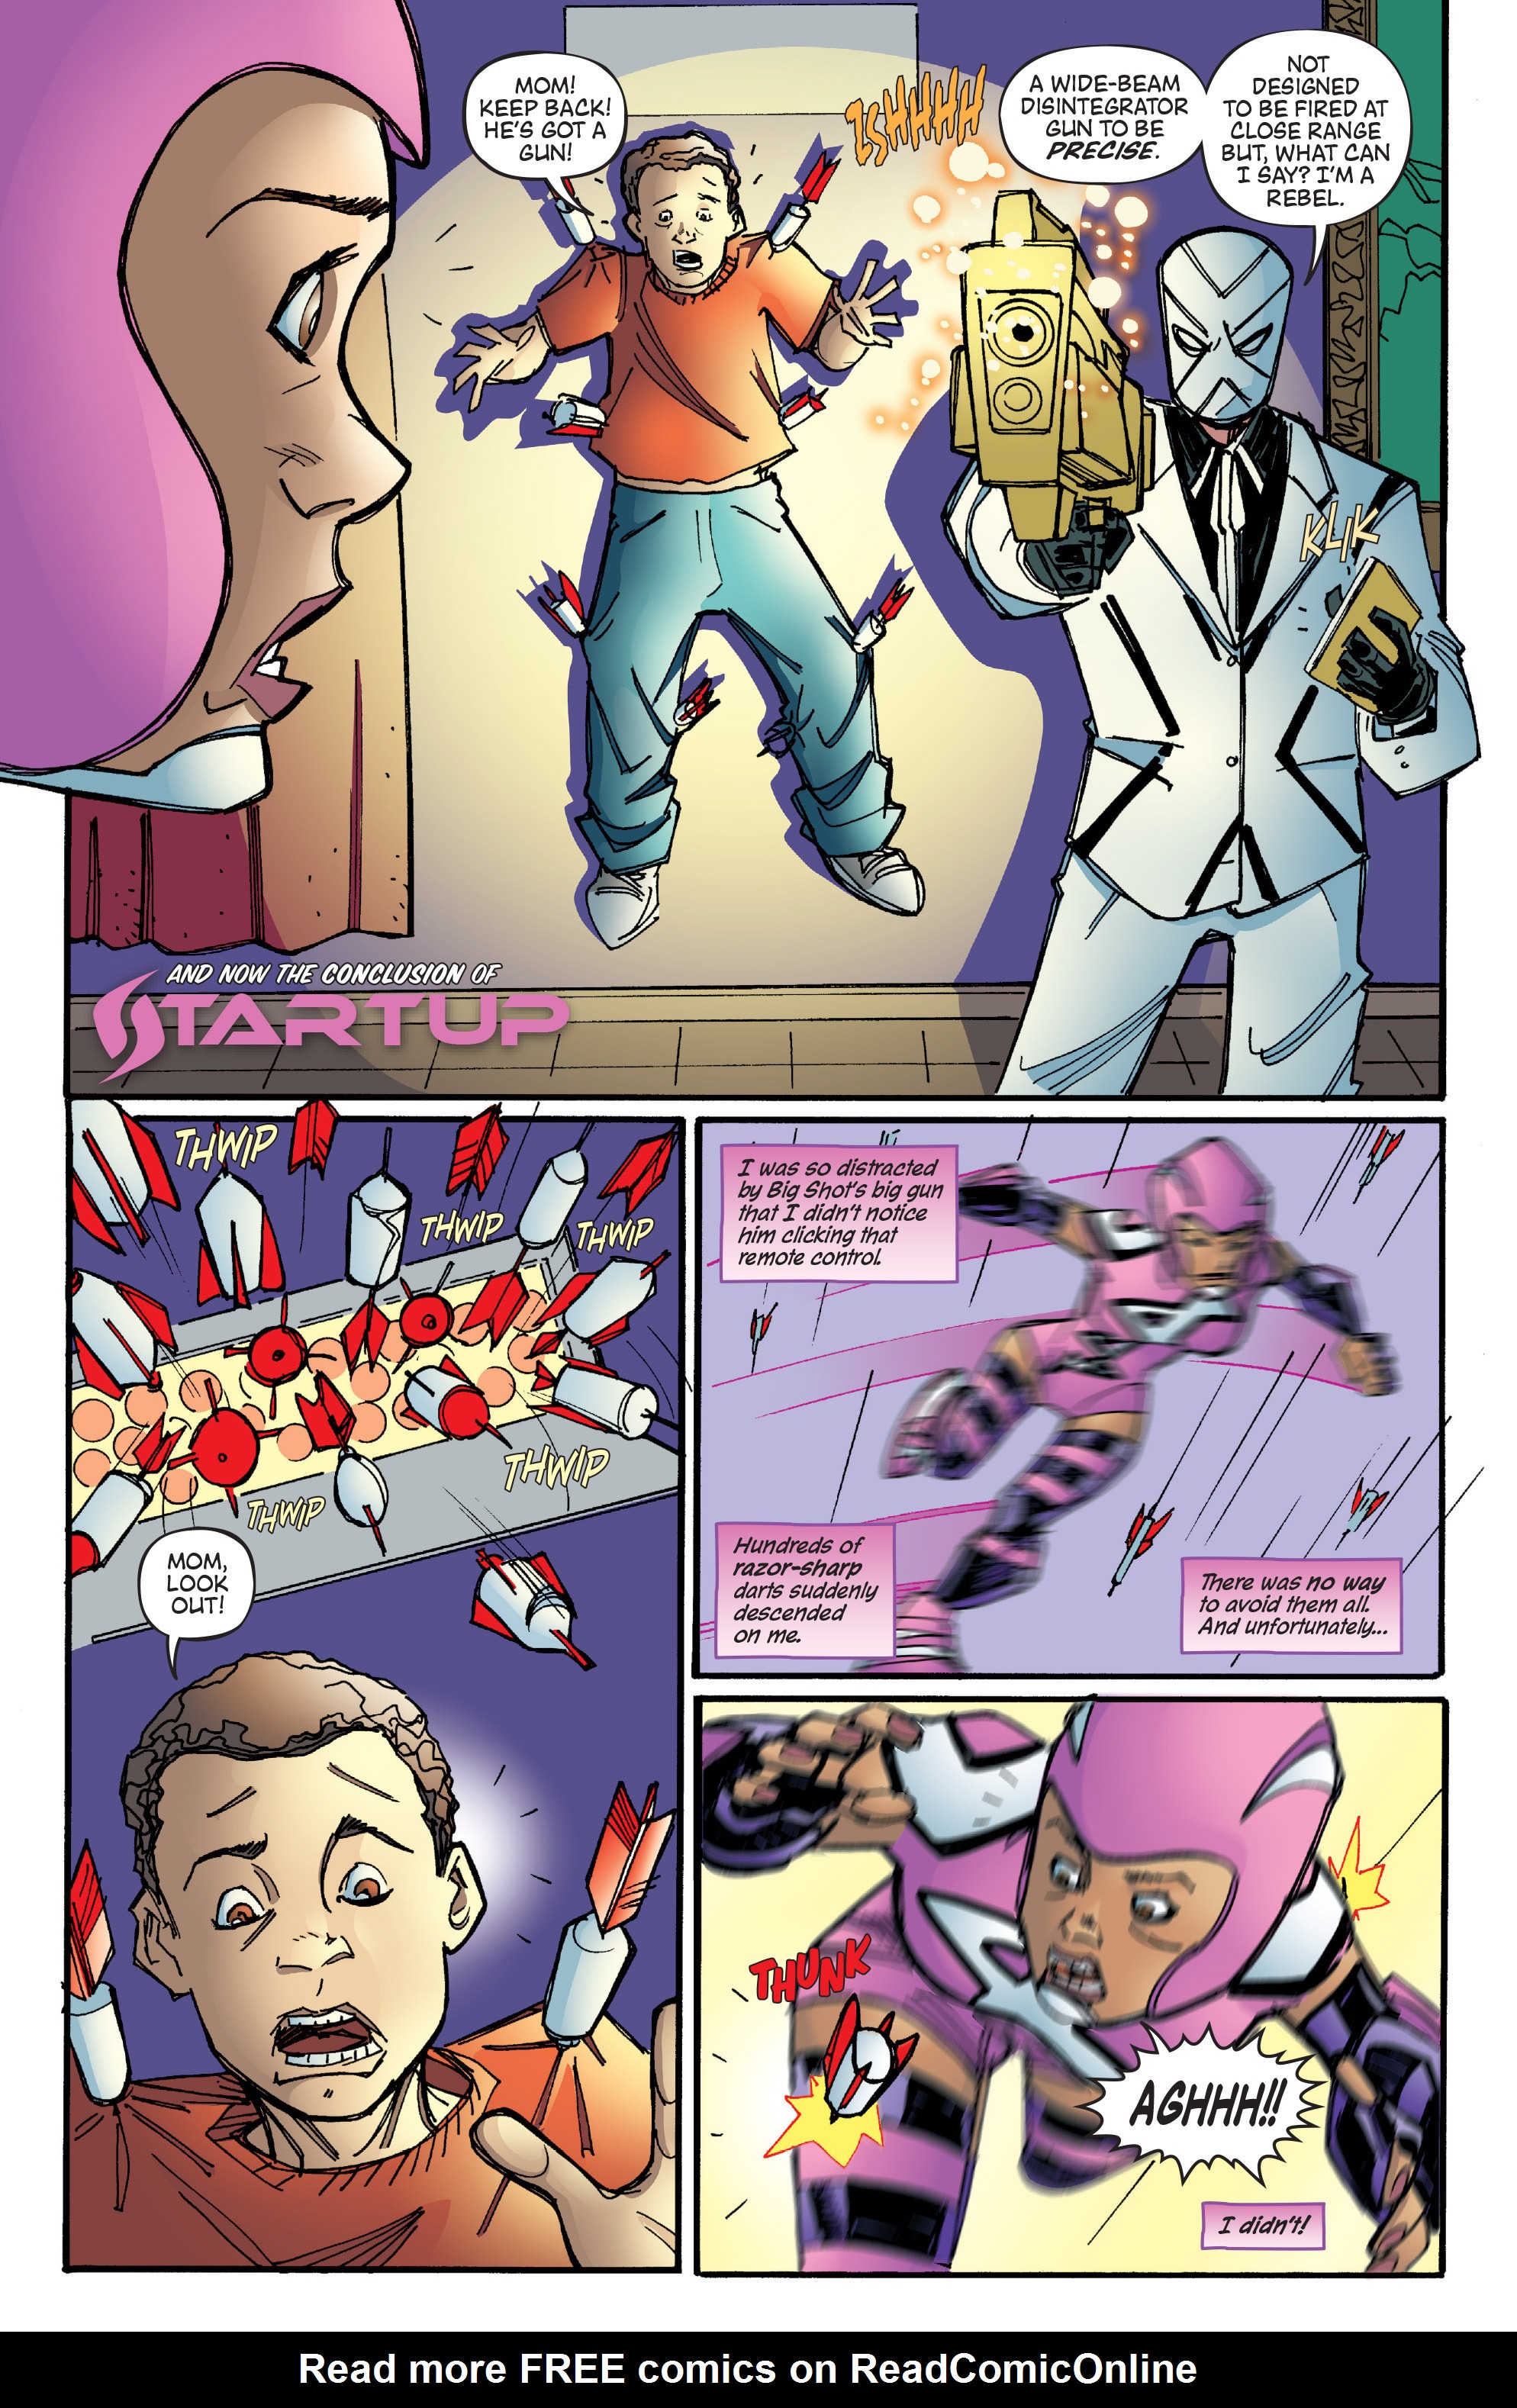 Read online Startup comic -  Issue #1.3 - 16